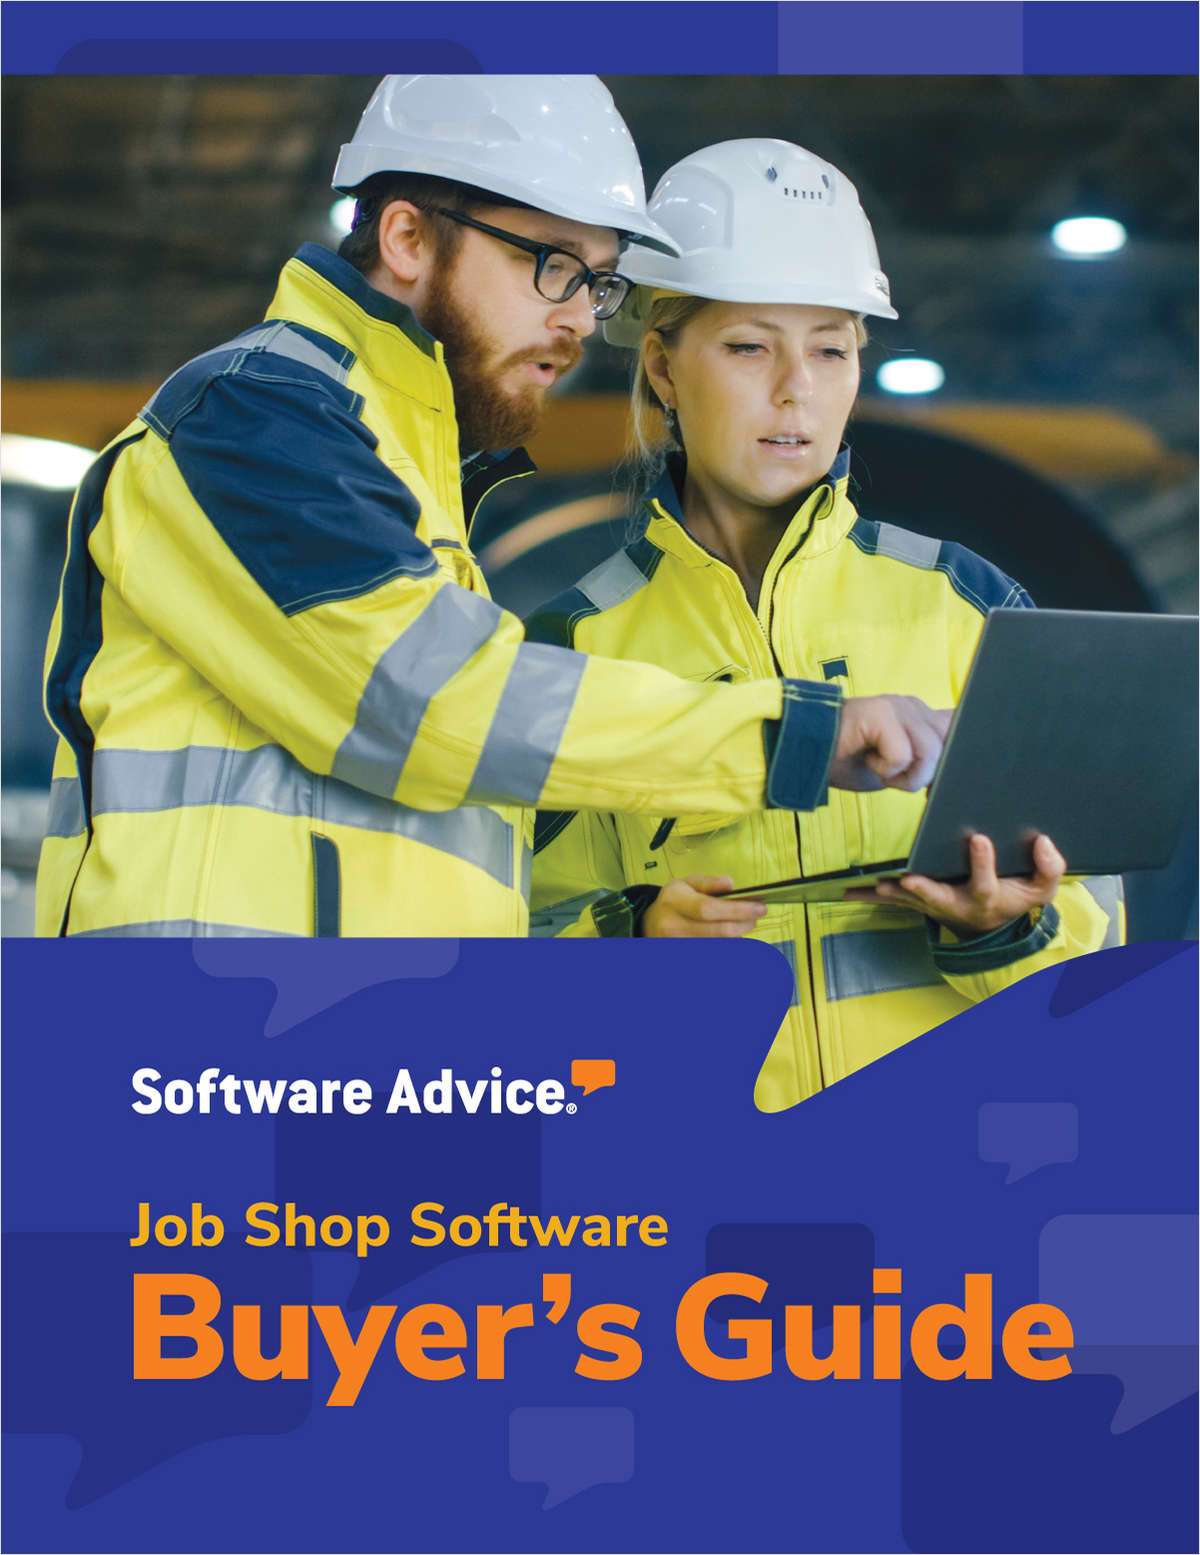 What You Need to Know Before Buying Job Shop Software